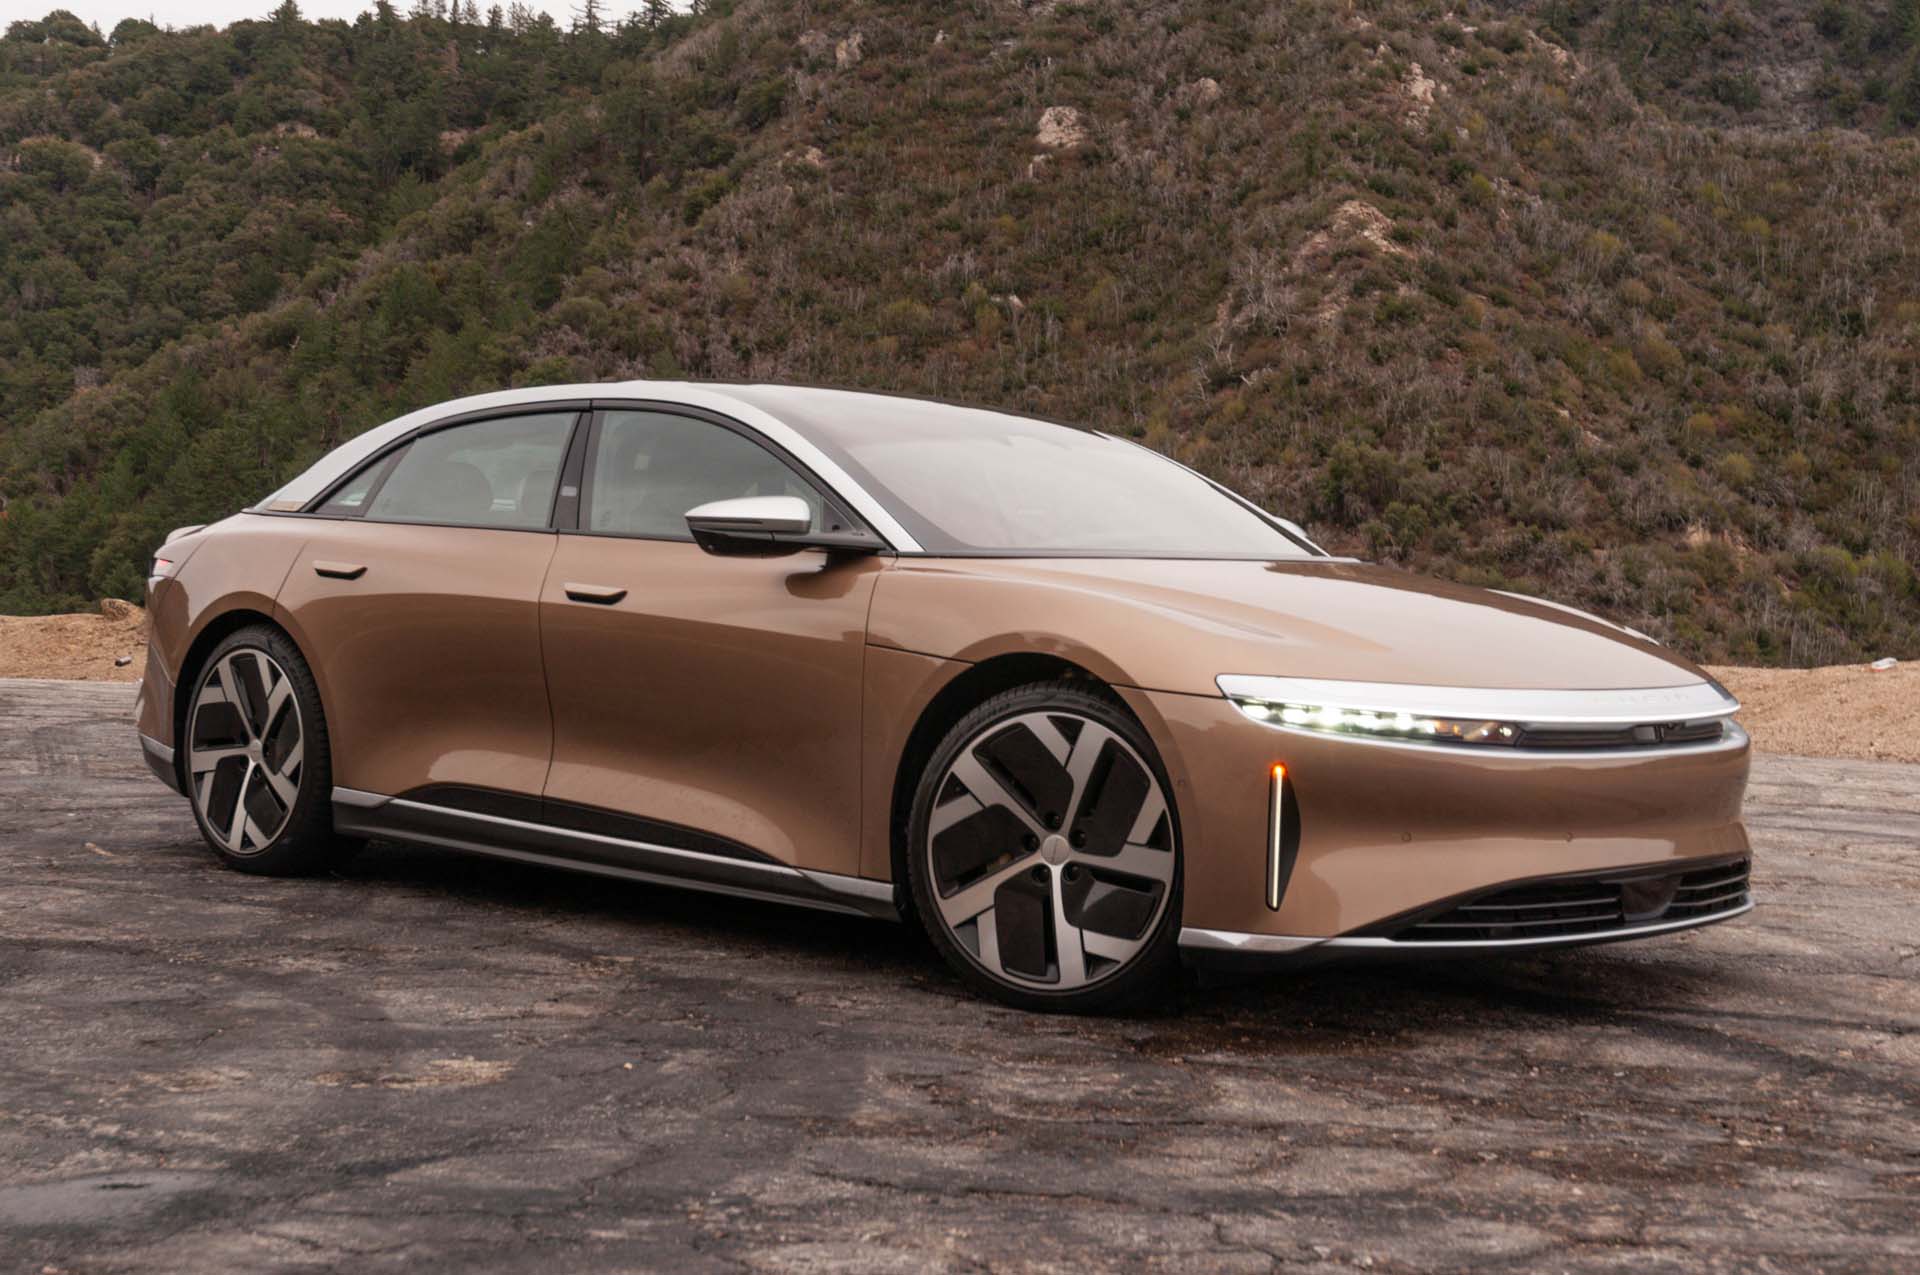 2022 Lucid Air Prices, Reviews, Pictures News | lupon.gov.ph